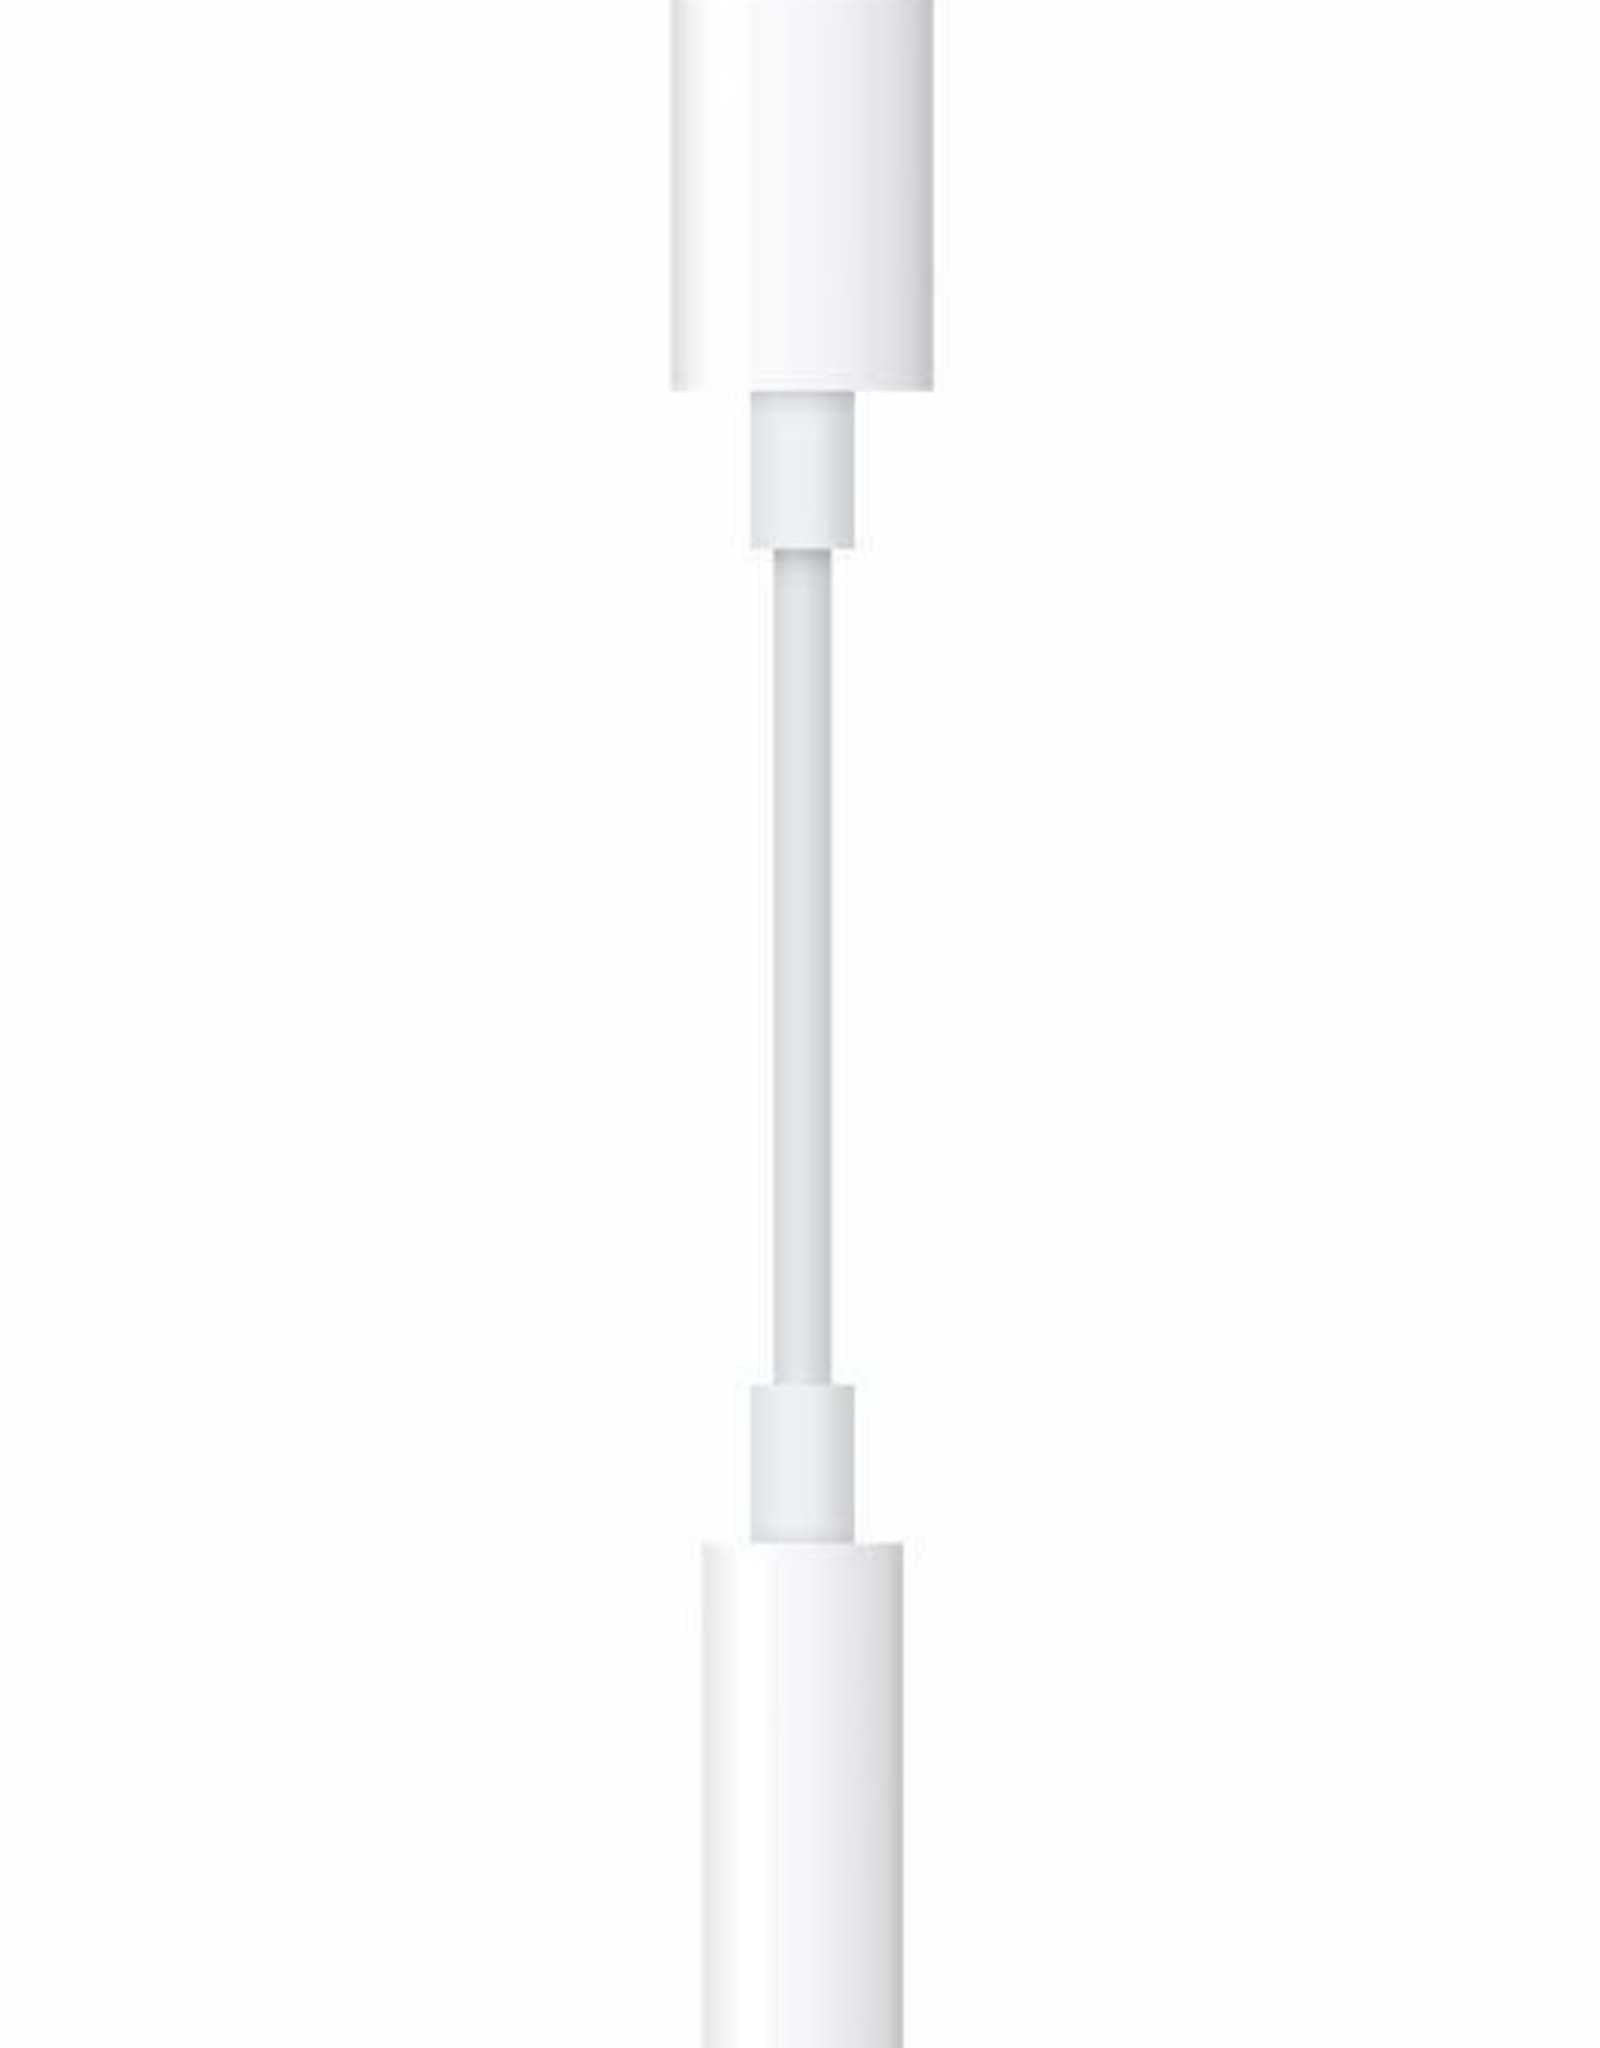 Apple Apple Lightning to 3.5 mm Headphone Jack Adapter | Apple AUX to USB Cable